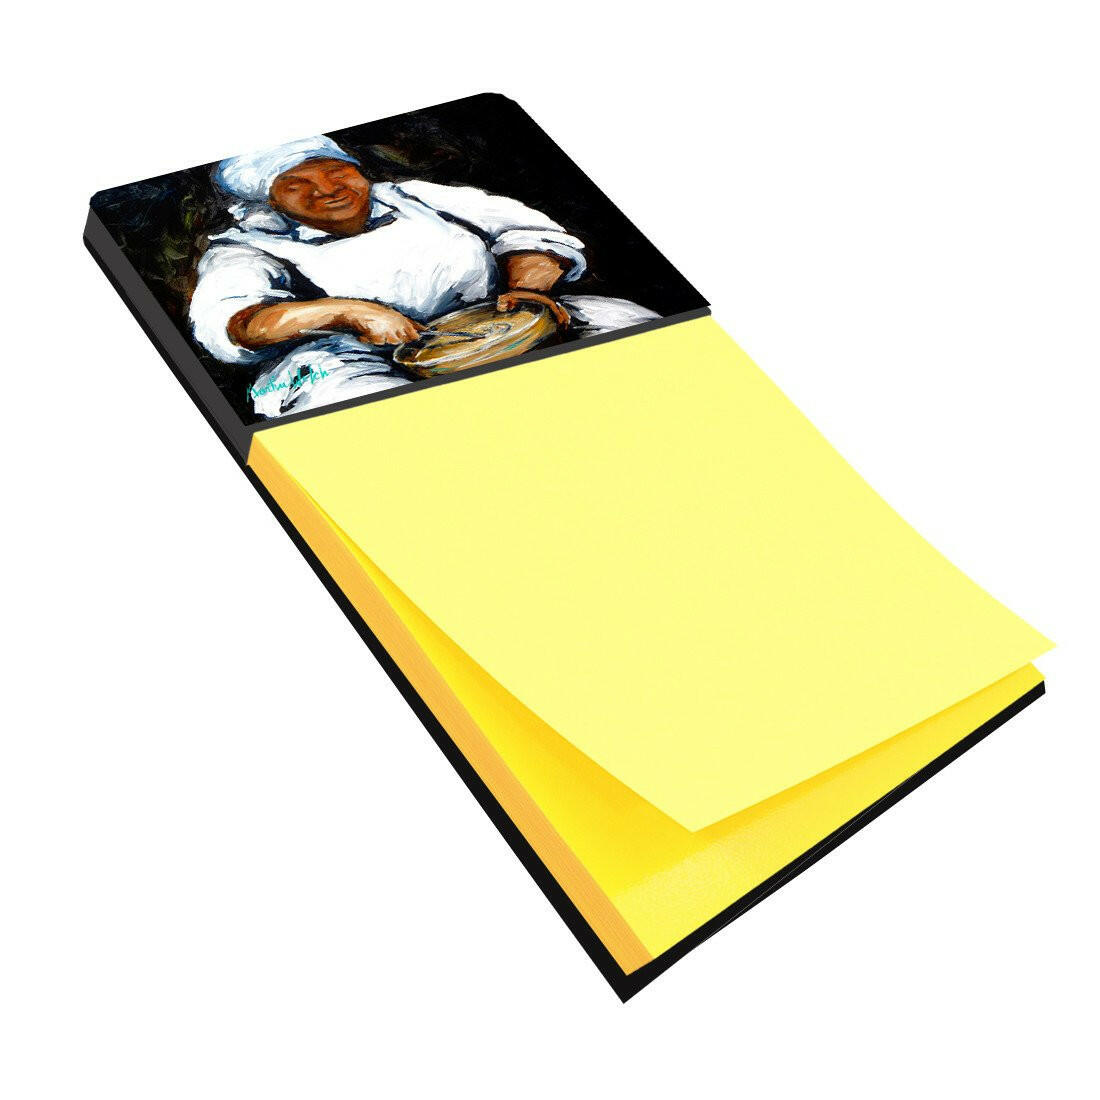 Hot Water Cornbread  Refiillable Sticky Note Holder or Postit Note Dispenser MW1087SN by Caroline's Treasures